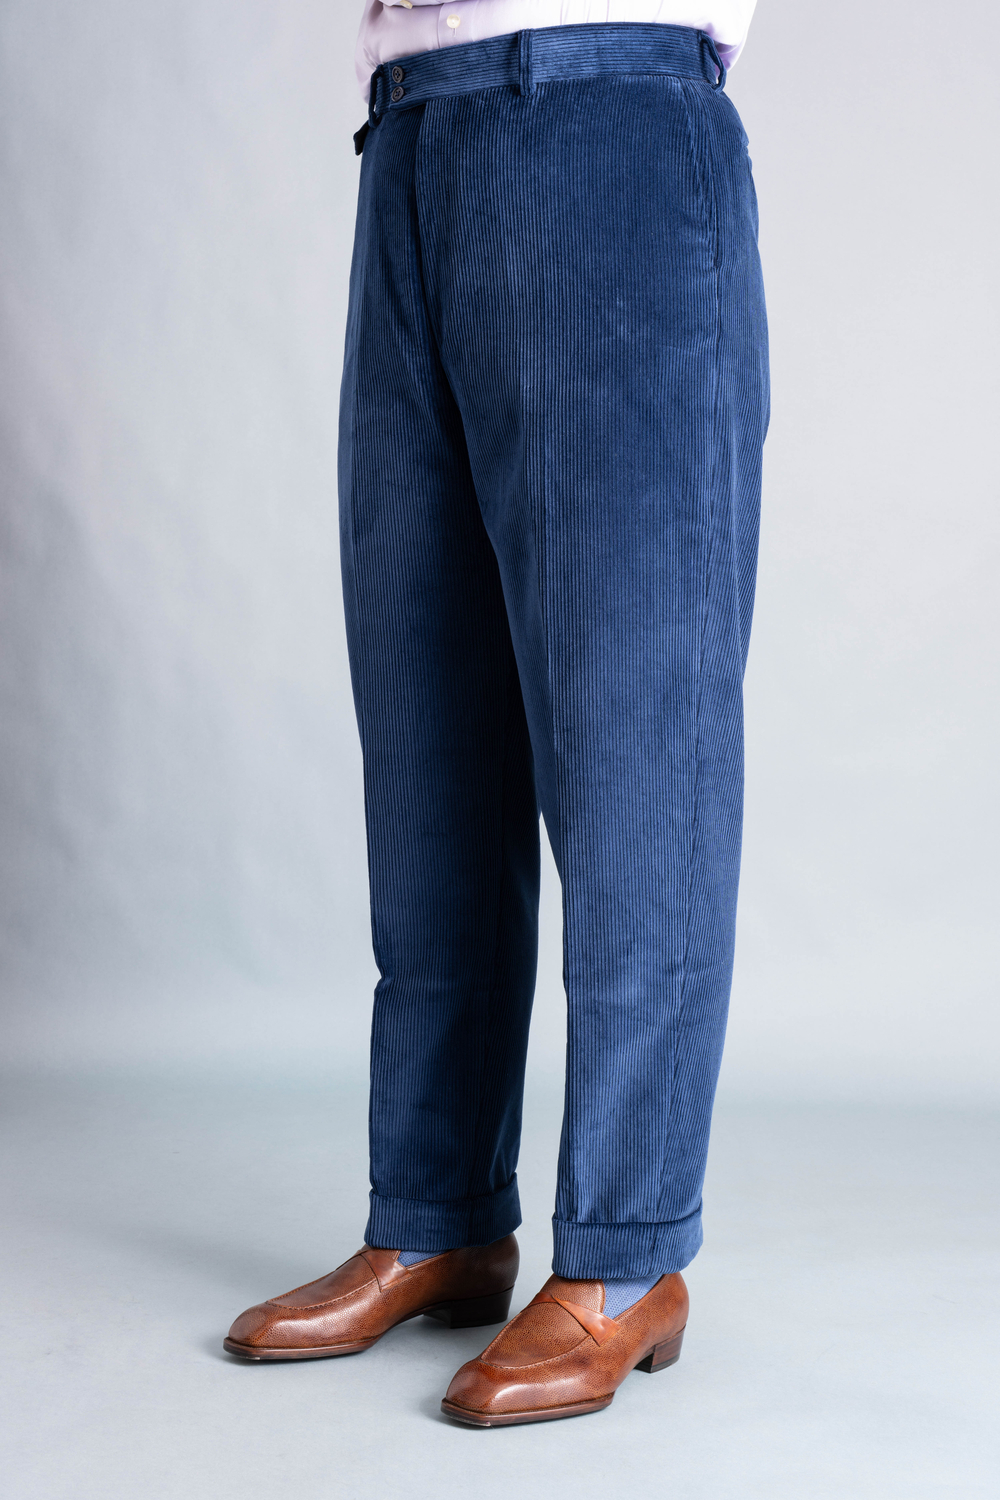 Infantry Blue Corduroy Trousers -Stancliffe Flat-Front in 8-Wale